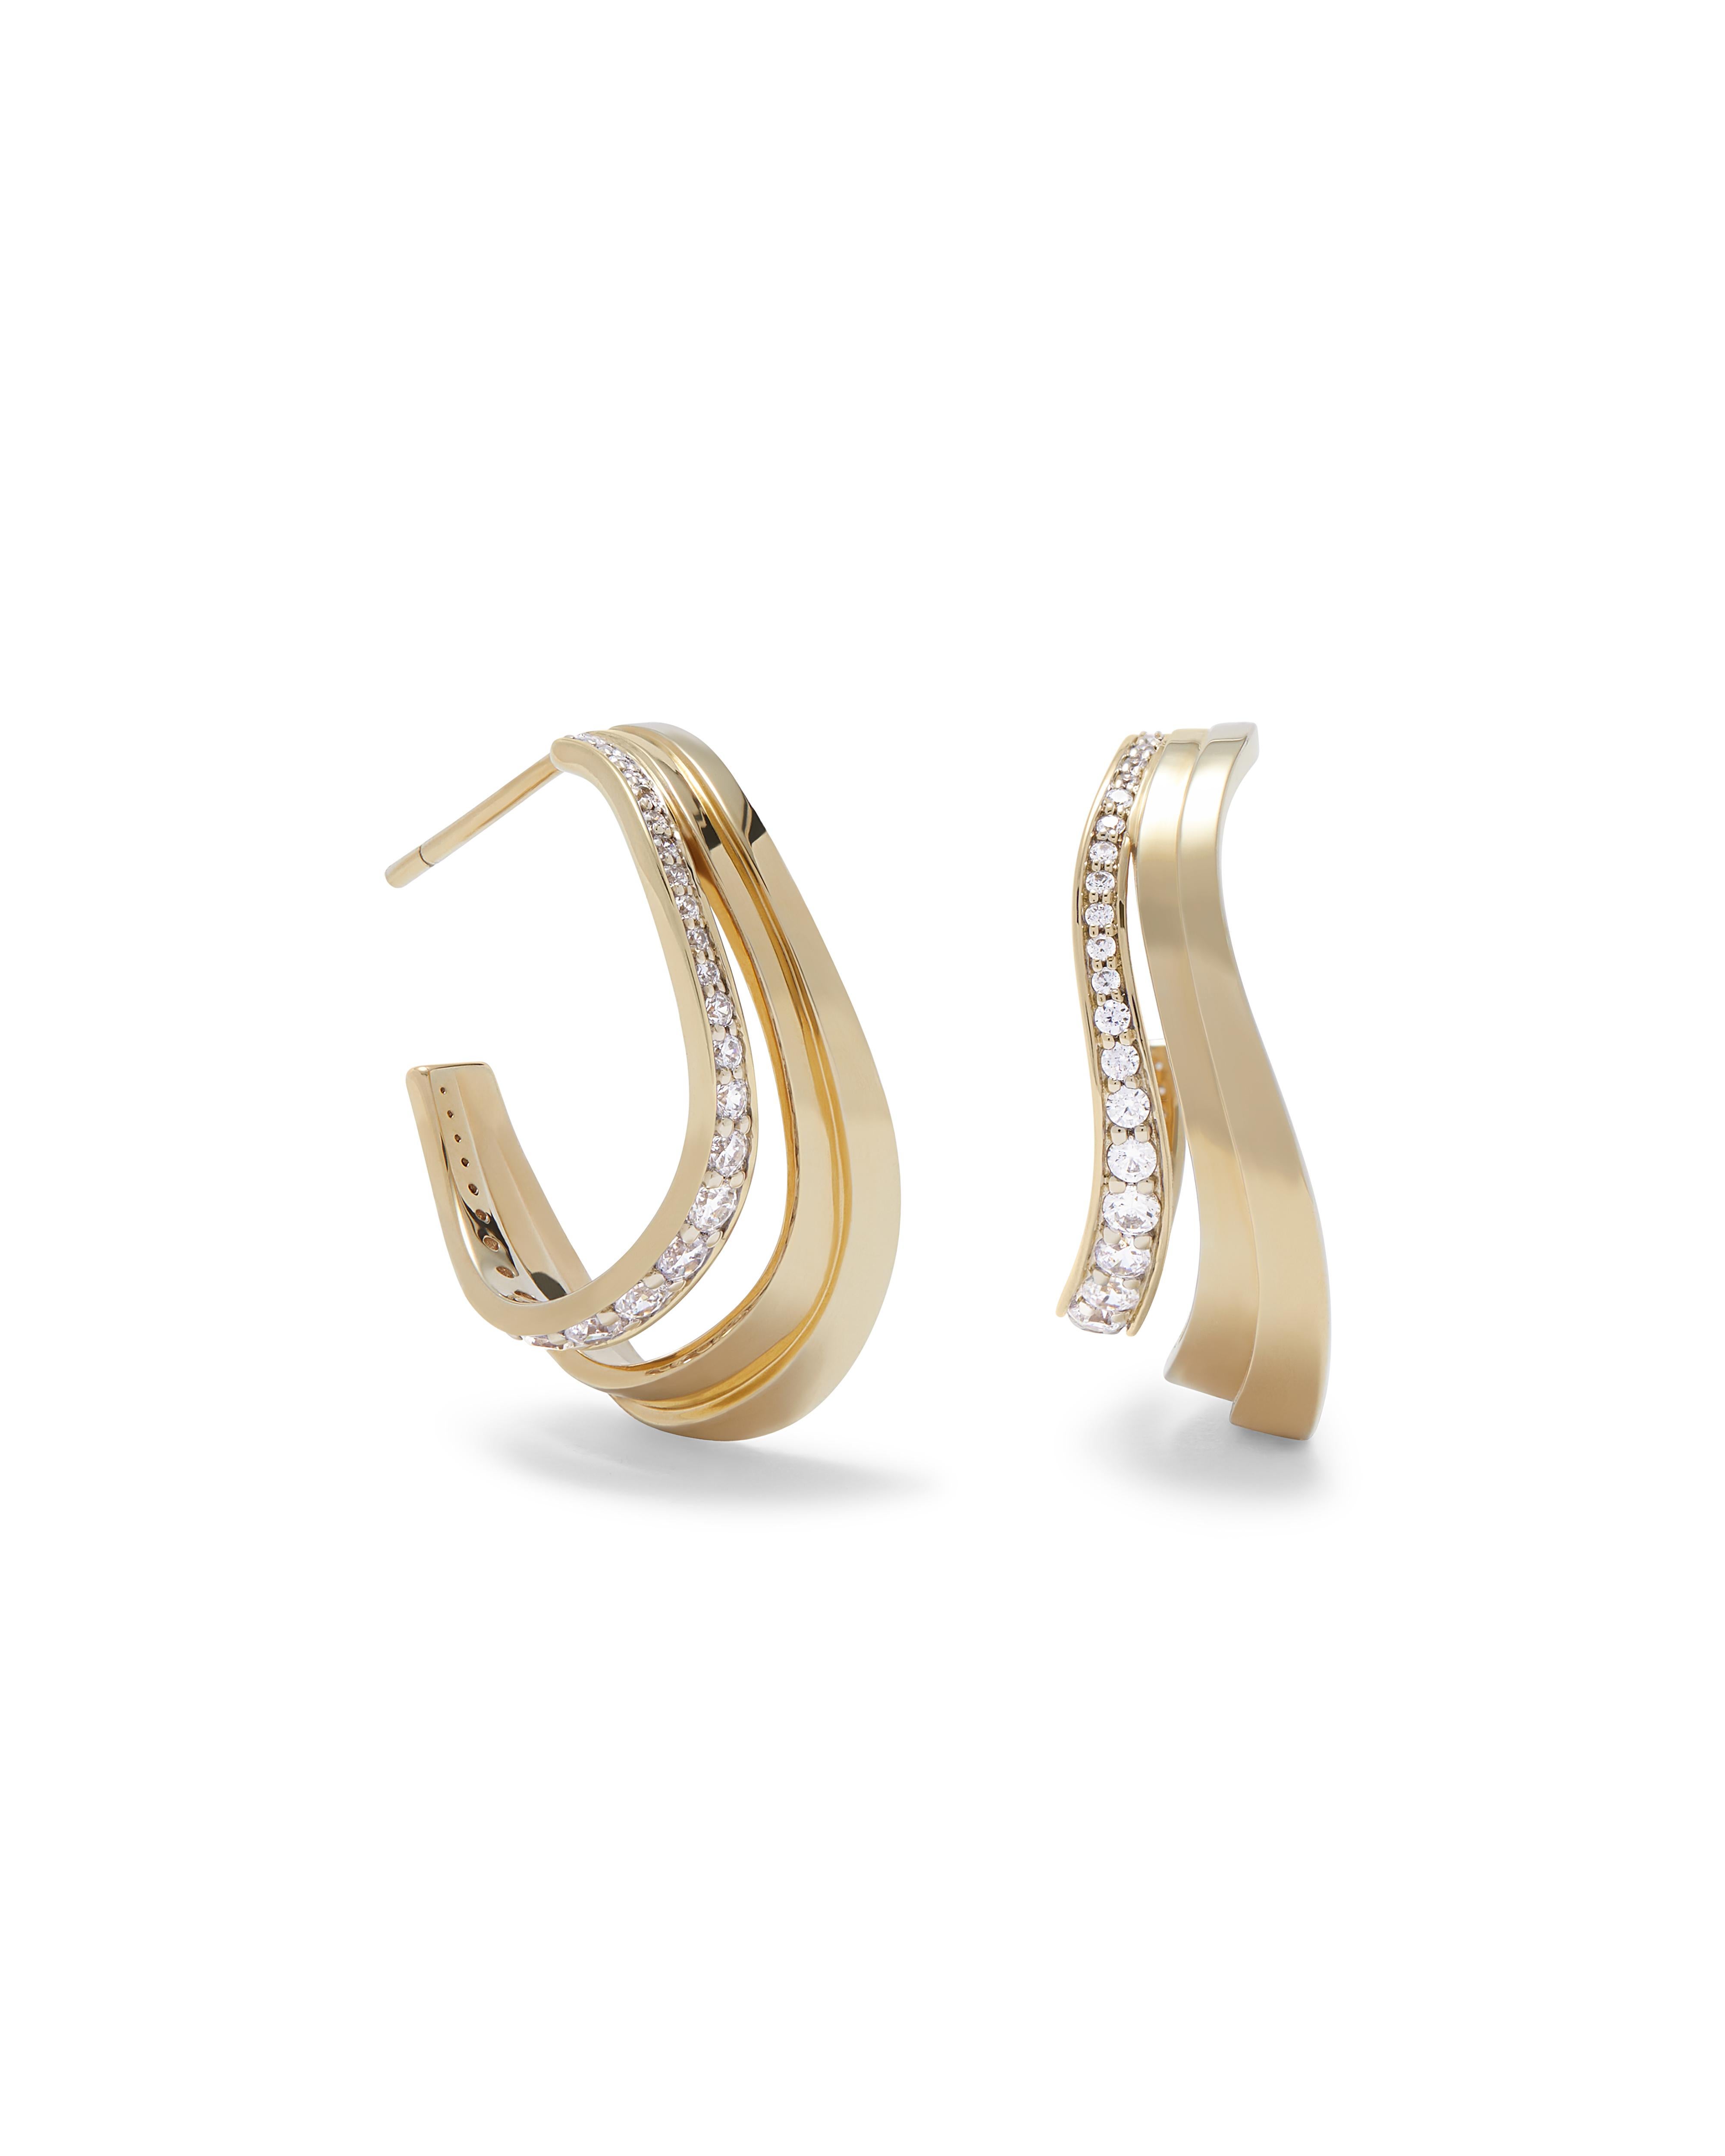 Inspired by the flowing curves of landforms, these sculptural 18k yellow gold hoop earrings are at once modern yet feminine. The hoops feature a tiered design with soft flowing lines that are beautifully accented with brilliant cut diamonds.  Hoops